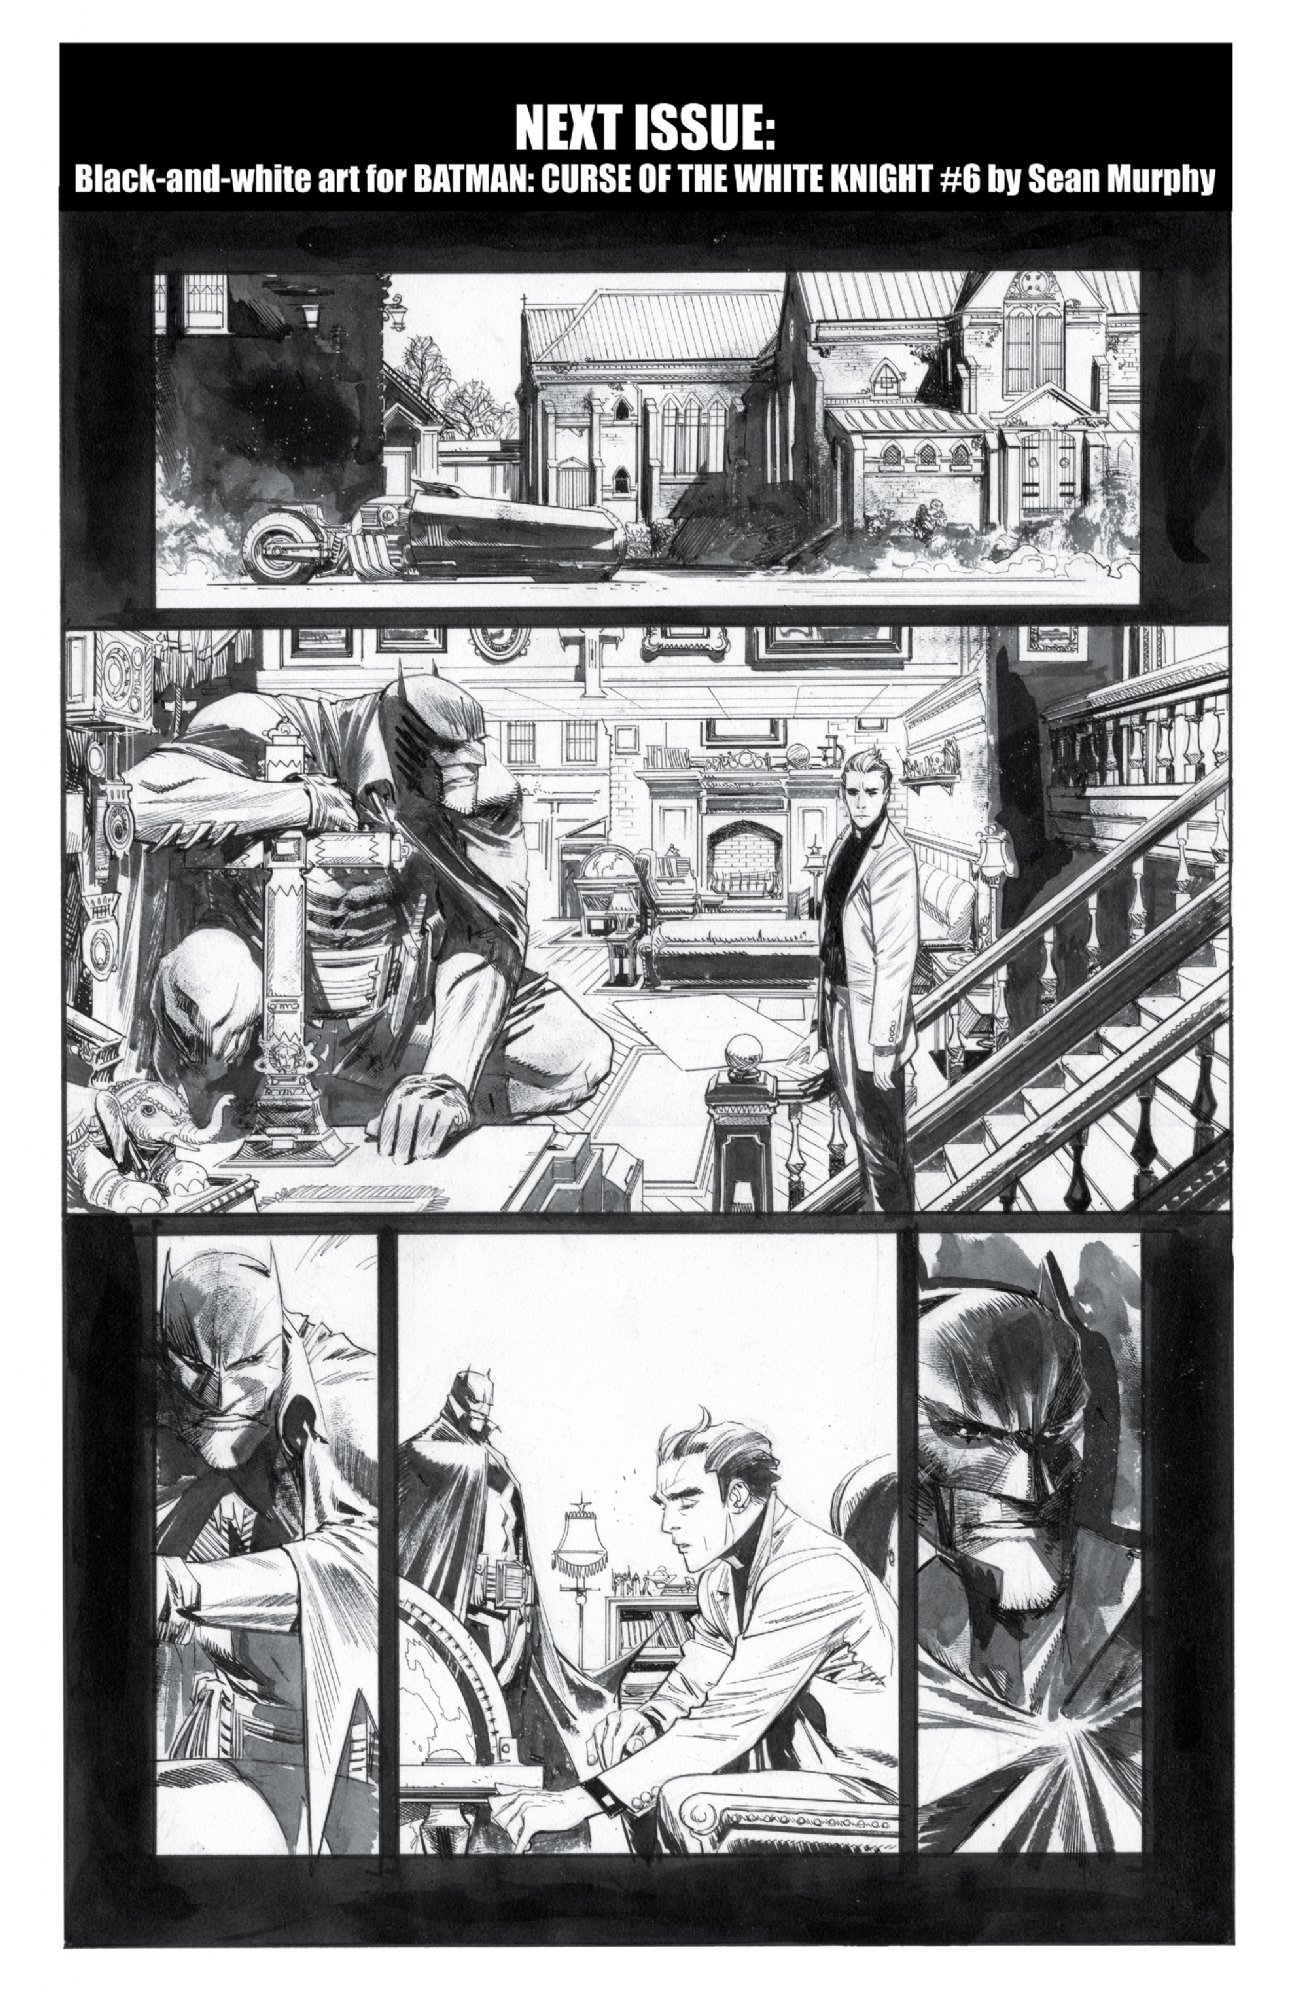 Sean Murphy Shares B+W Preview Pages For Batman: Curse Of The